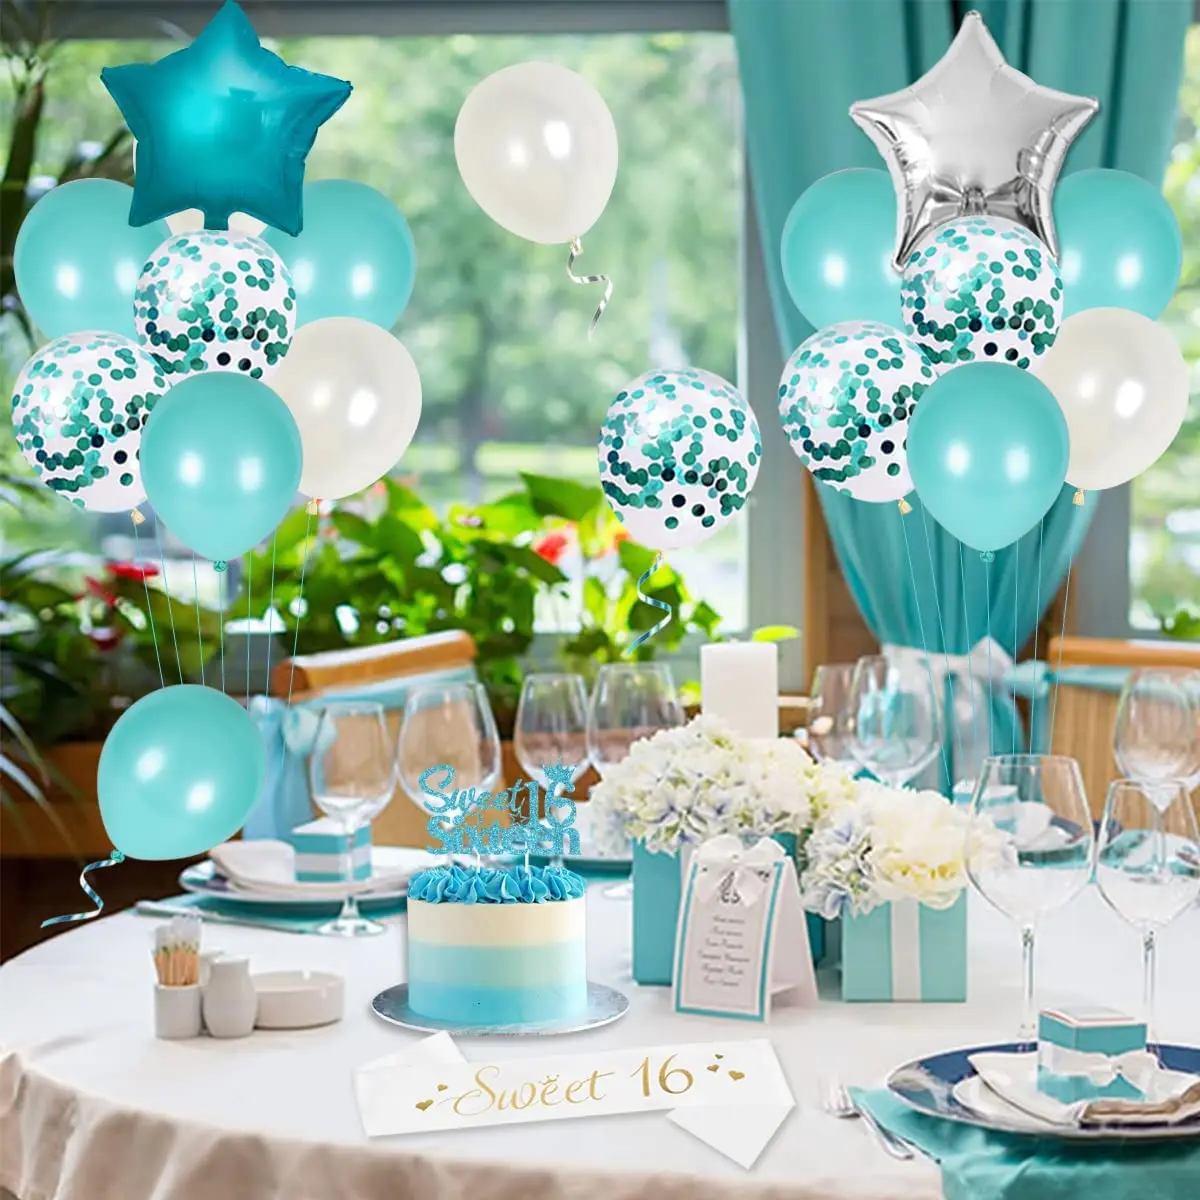 Teal Puff Ball Tissue Decoration - 16 in.